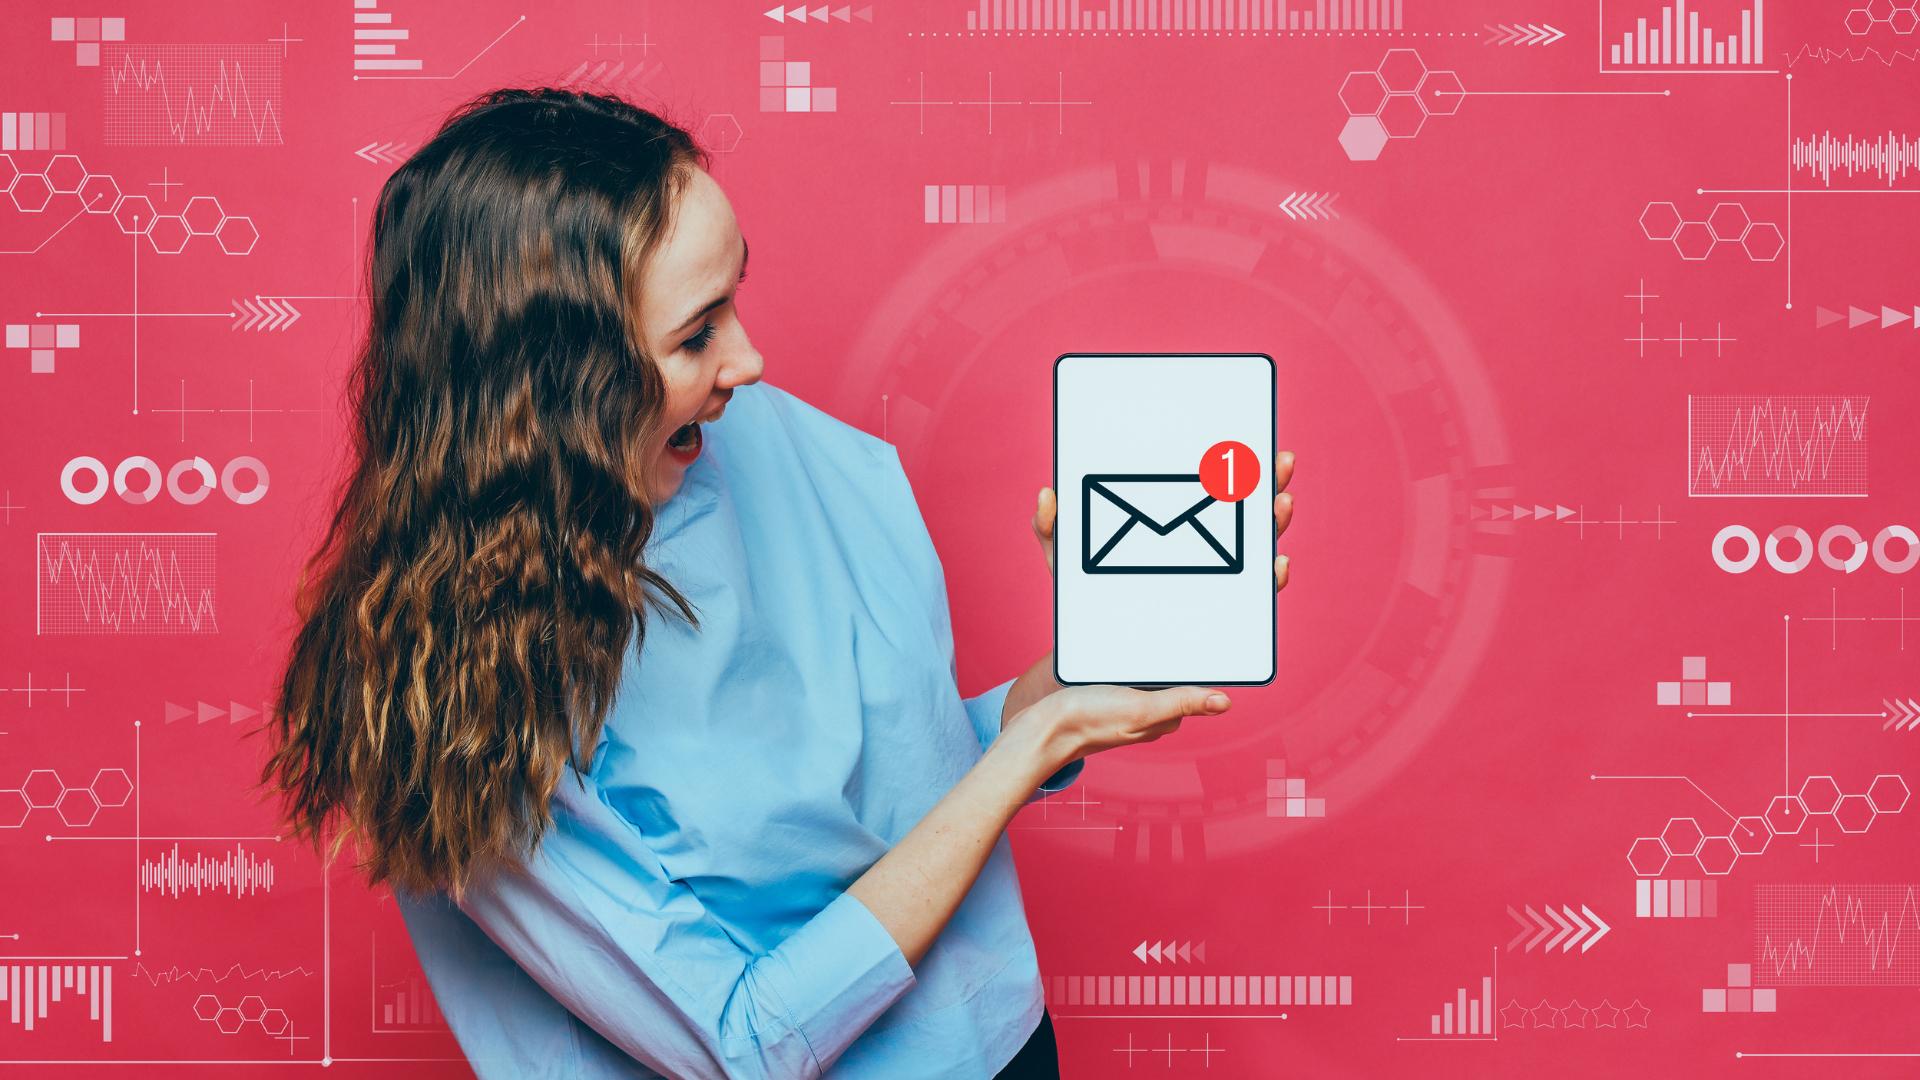 email marketing as an effective method to drive repeat business